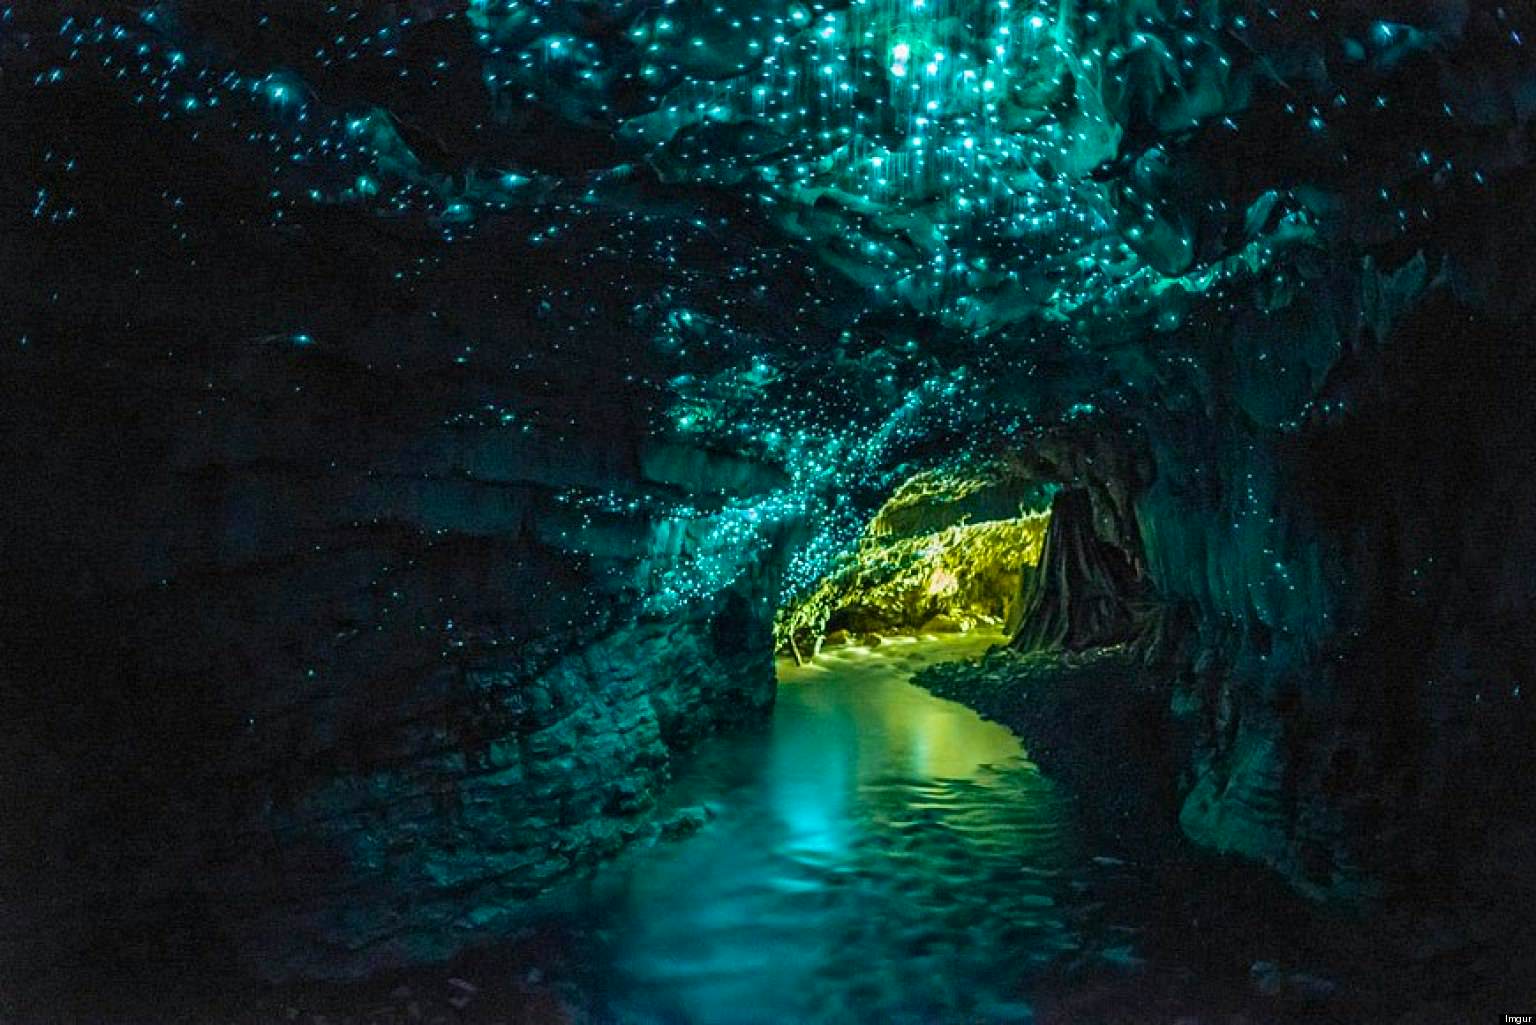 Waitomo Glowworm Caves from Paihia- Admissions Only